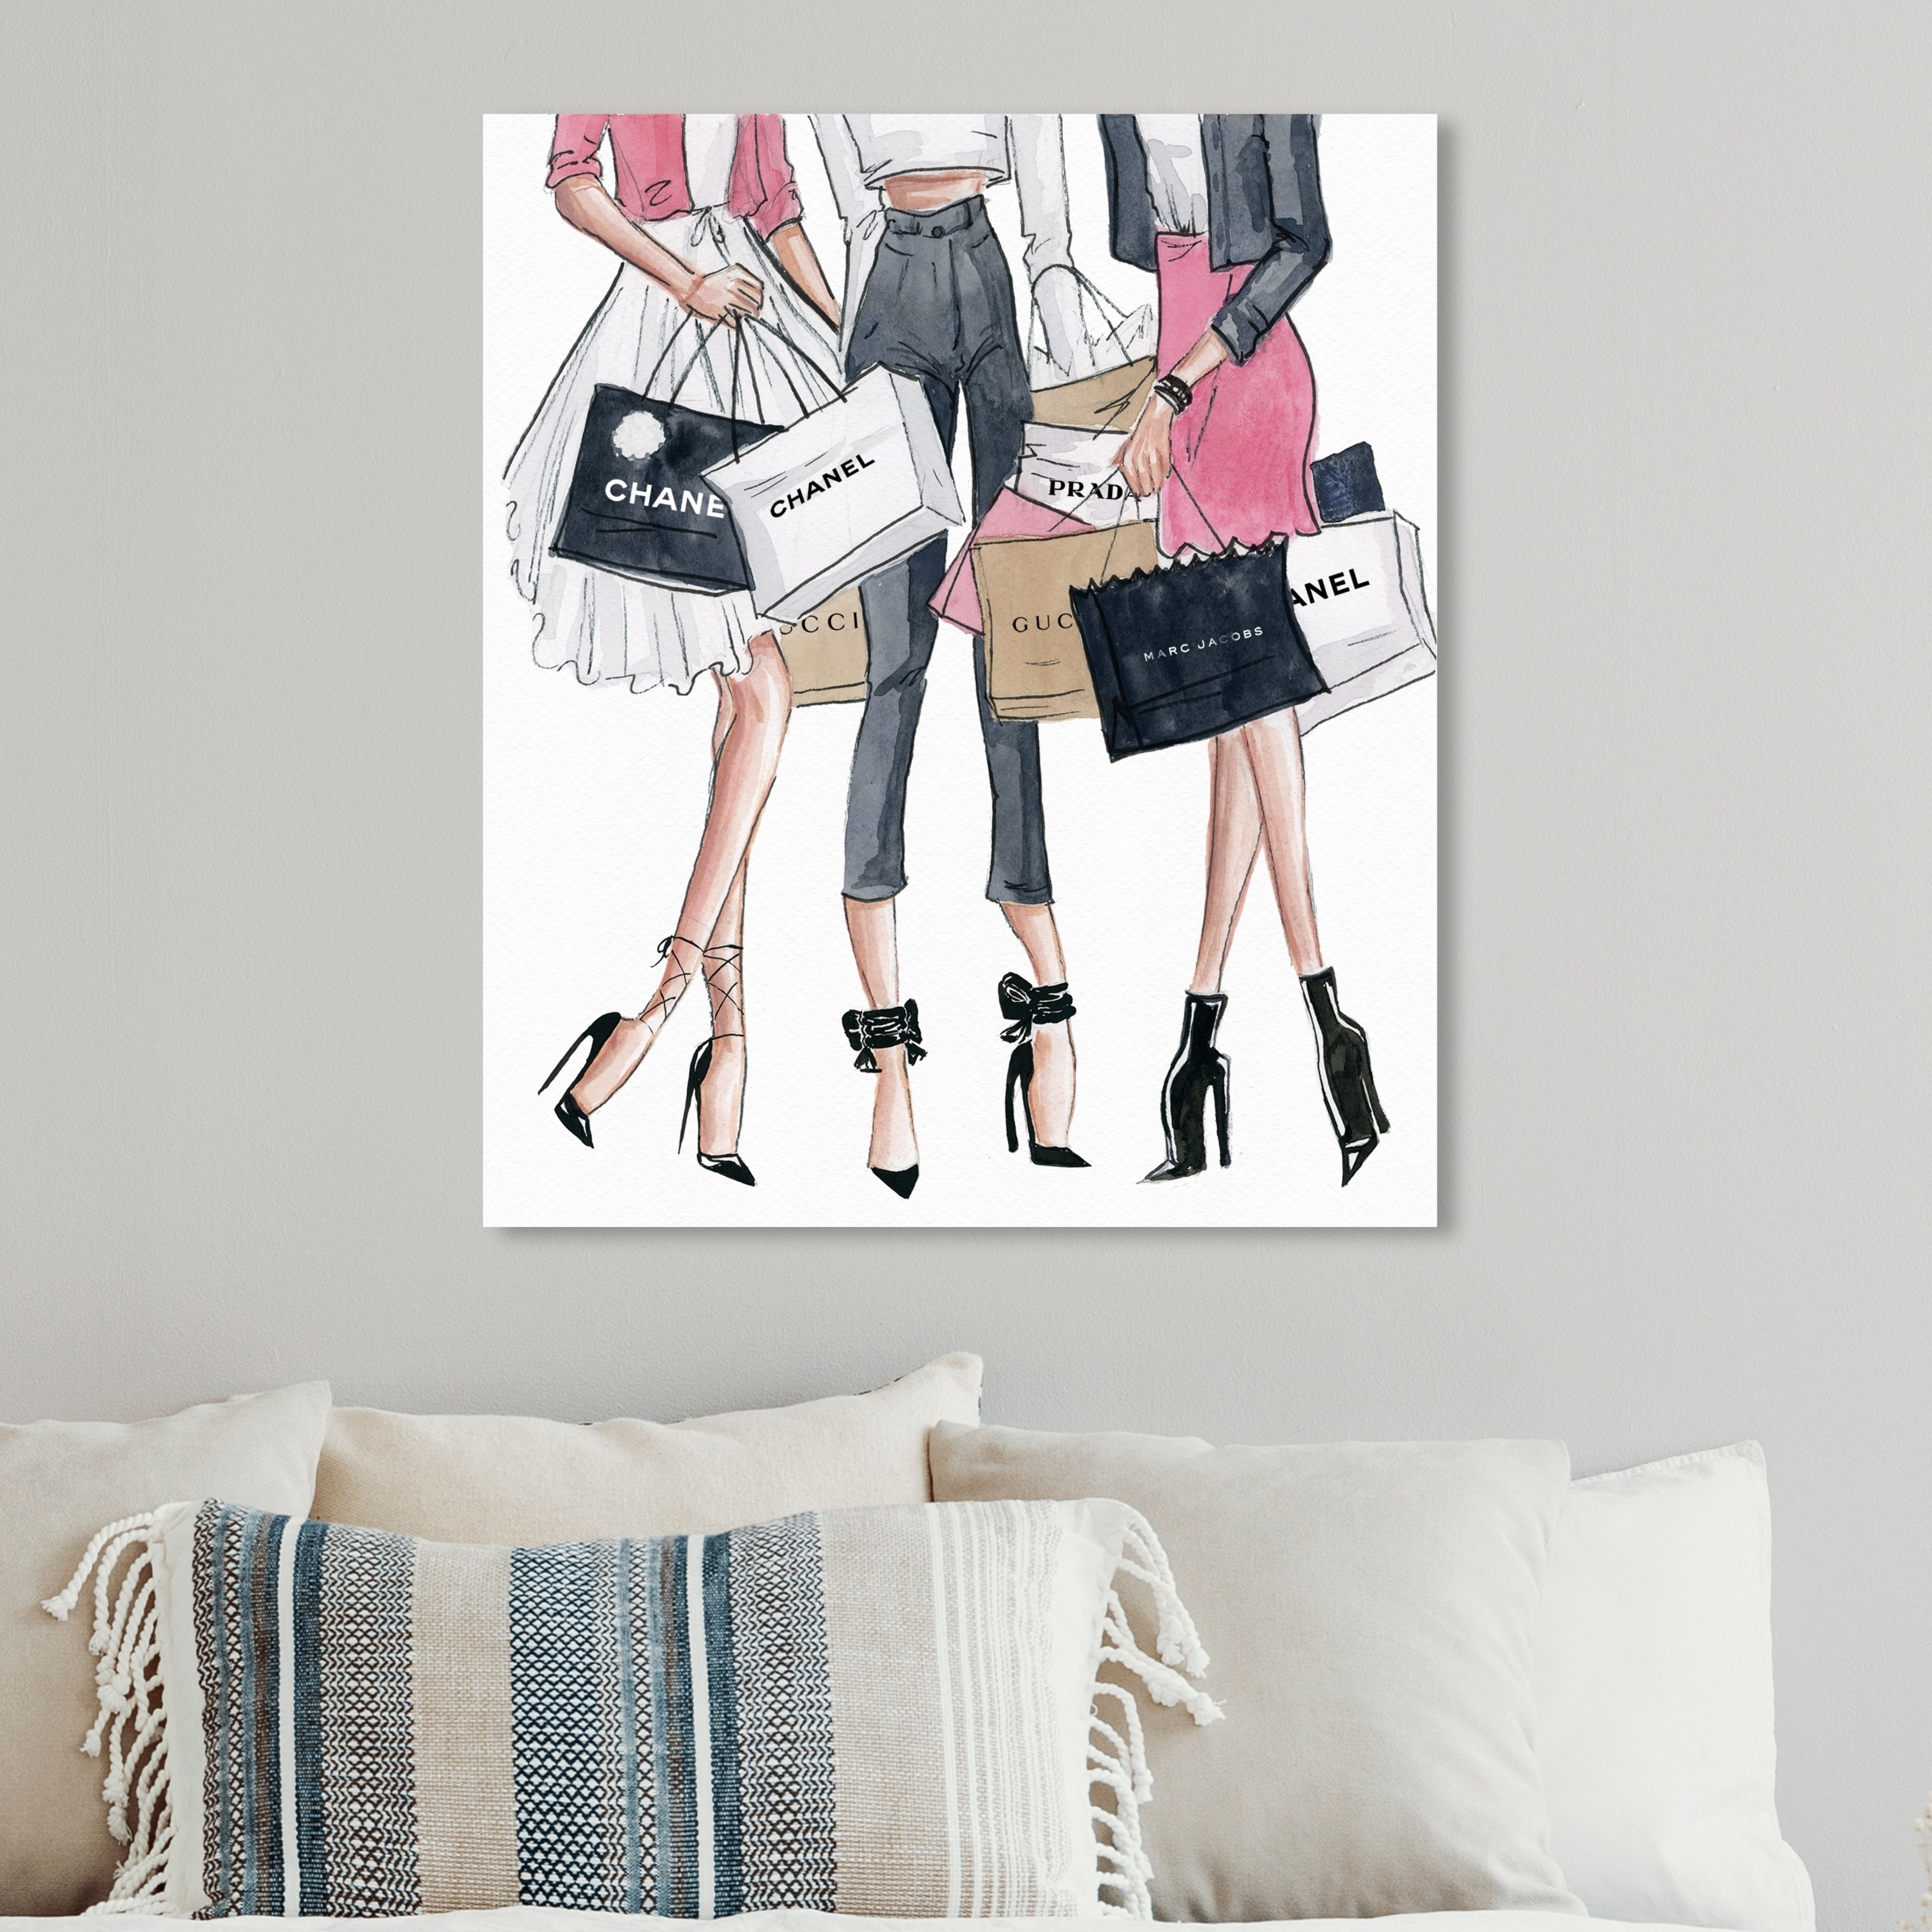 Oliver Gal 'Her Essentials Glitter' Fashion and Glam Wall Art Framed Canvas  Print Perfumes - Gray, Black - Bed Bath & Beyond - 32481059